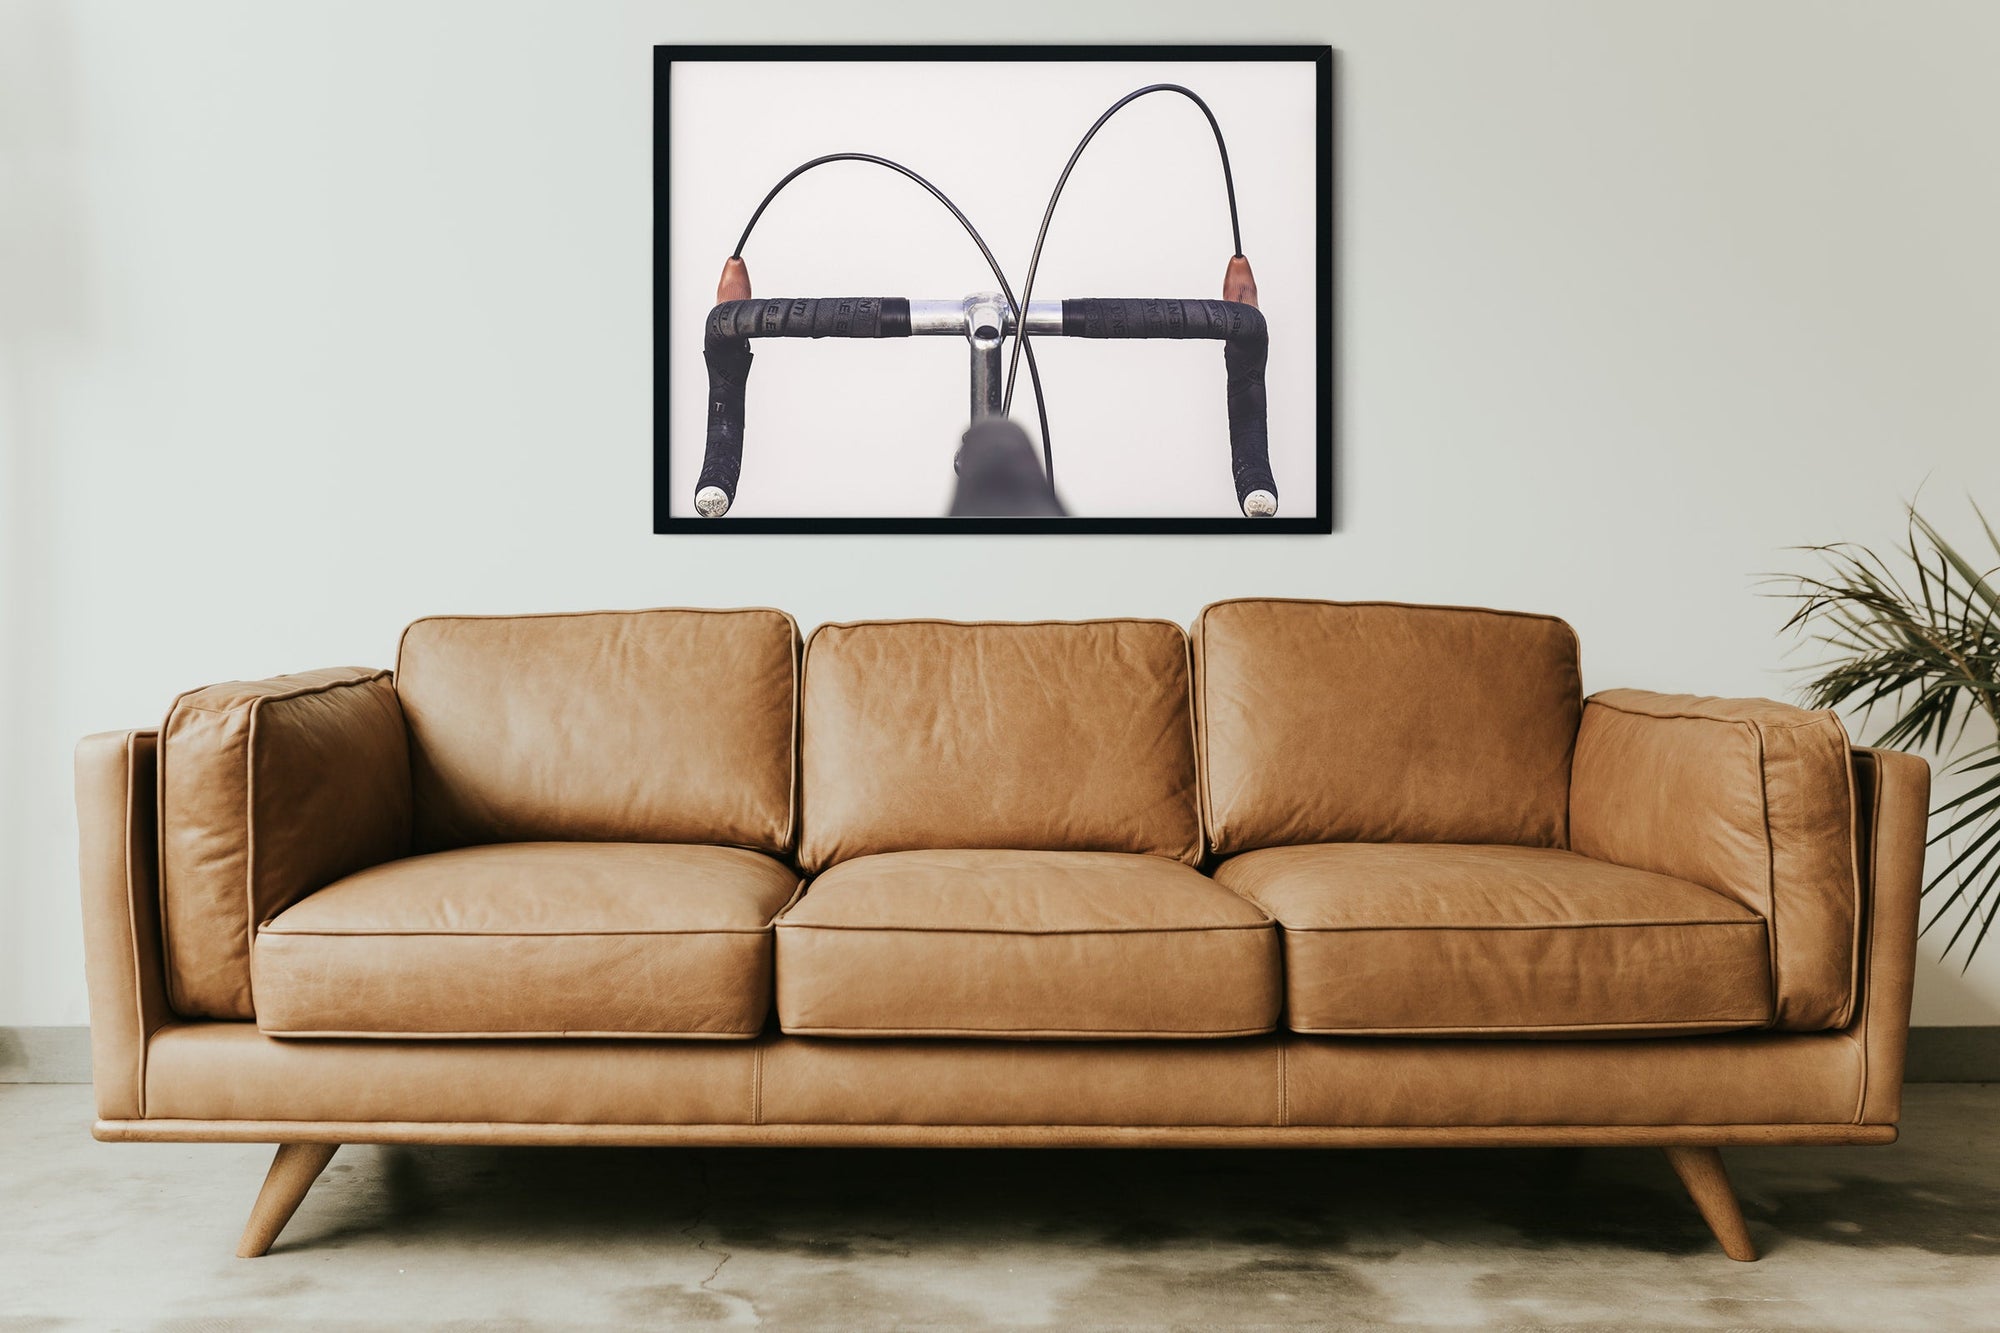 Framed bicycle print in a minimalist home